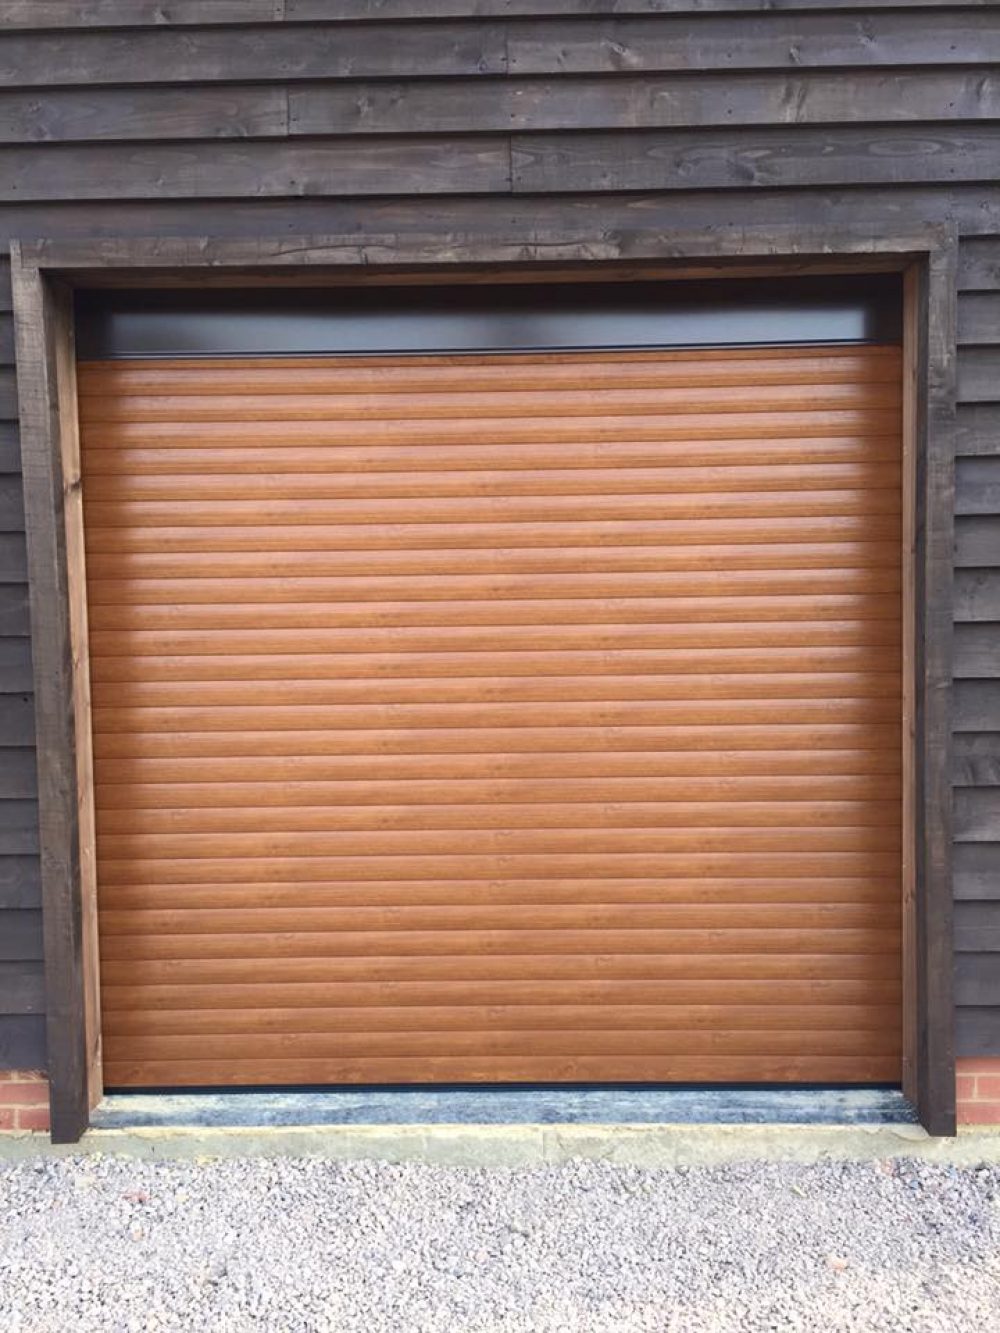 SeceuroGlide roller garage door fitted by Shutter Spec Security in a barn conversion